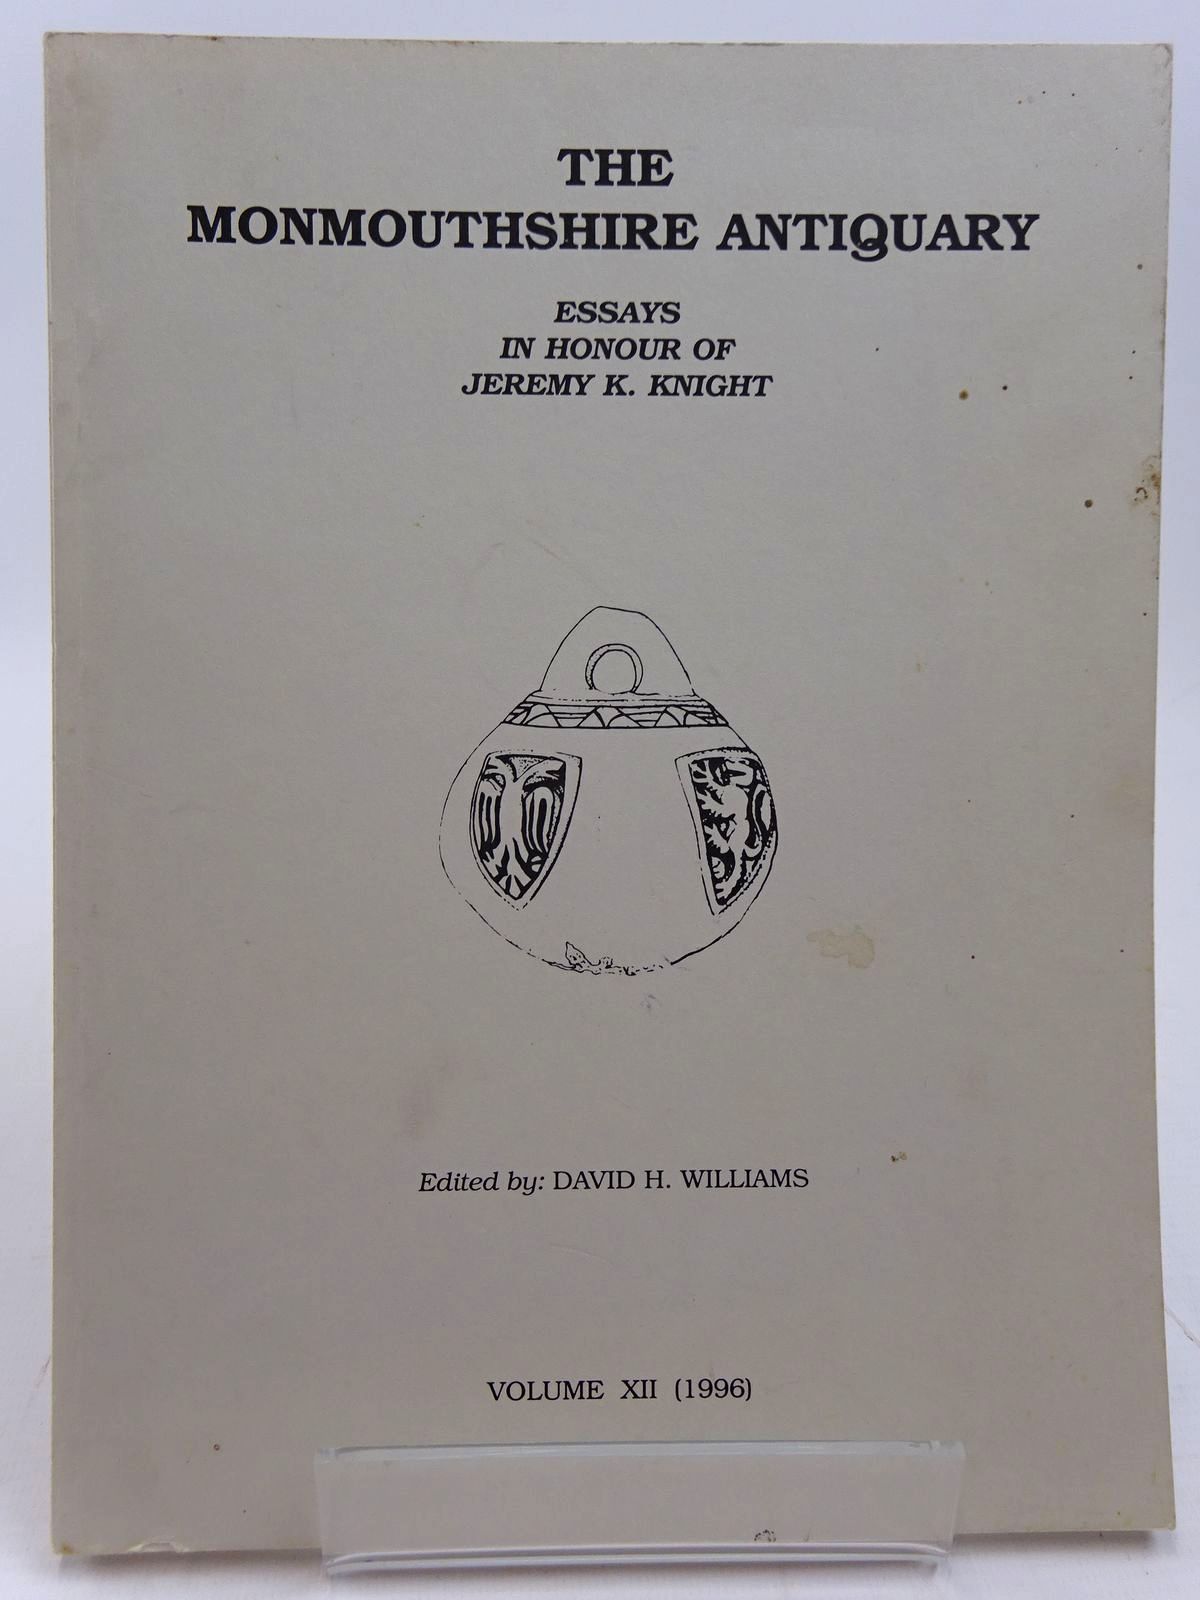 Photo of THE MONMOUTHSHIRE ANTIQUARY VOLUME XII written by Williams, David H. published by Monmouthshire Antiquarian Association (STOCK CODE: 2130976)  for sale by Stella & Rose's Books